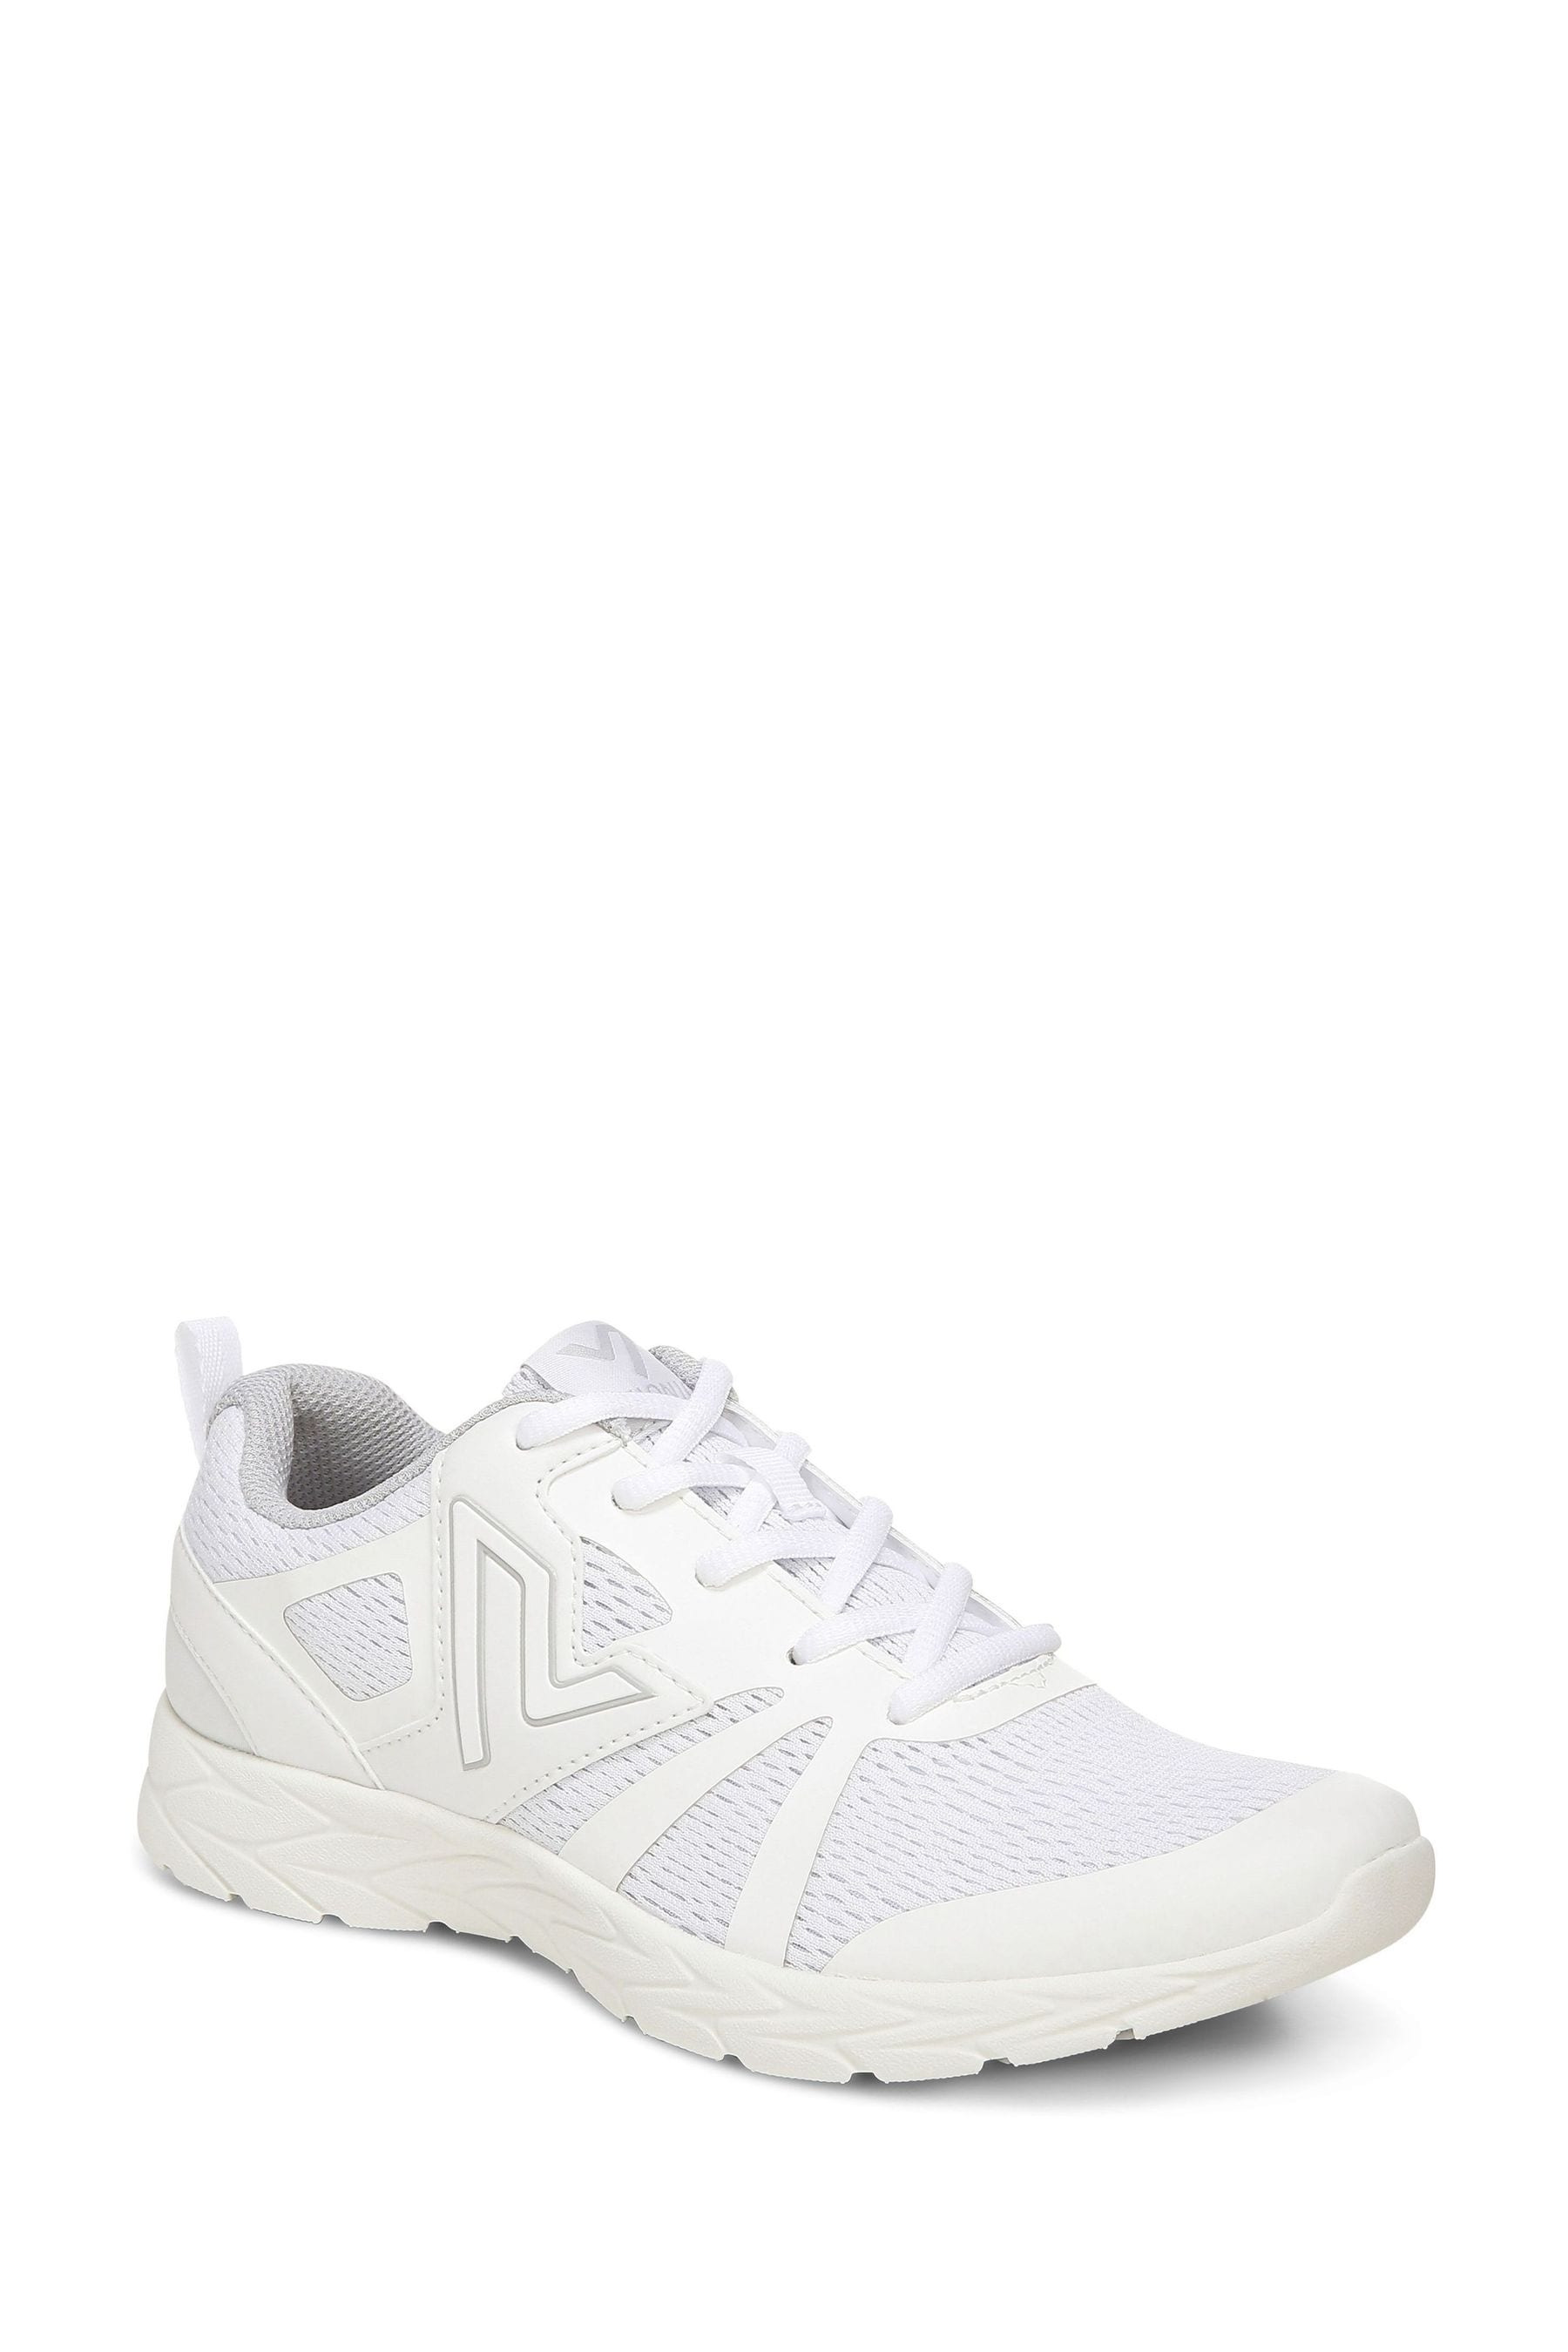 Buy Vionic 335Miles White Trainers from the Next UK online shop